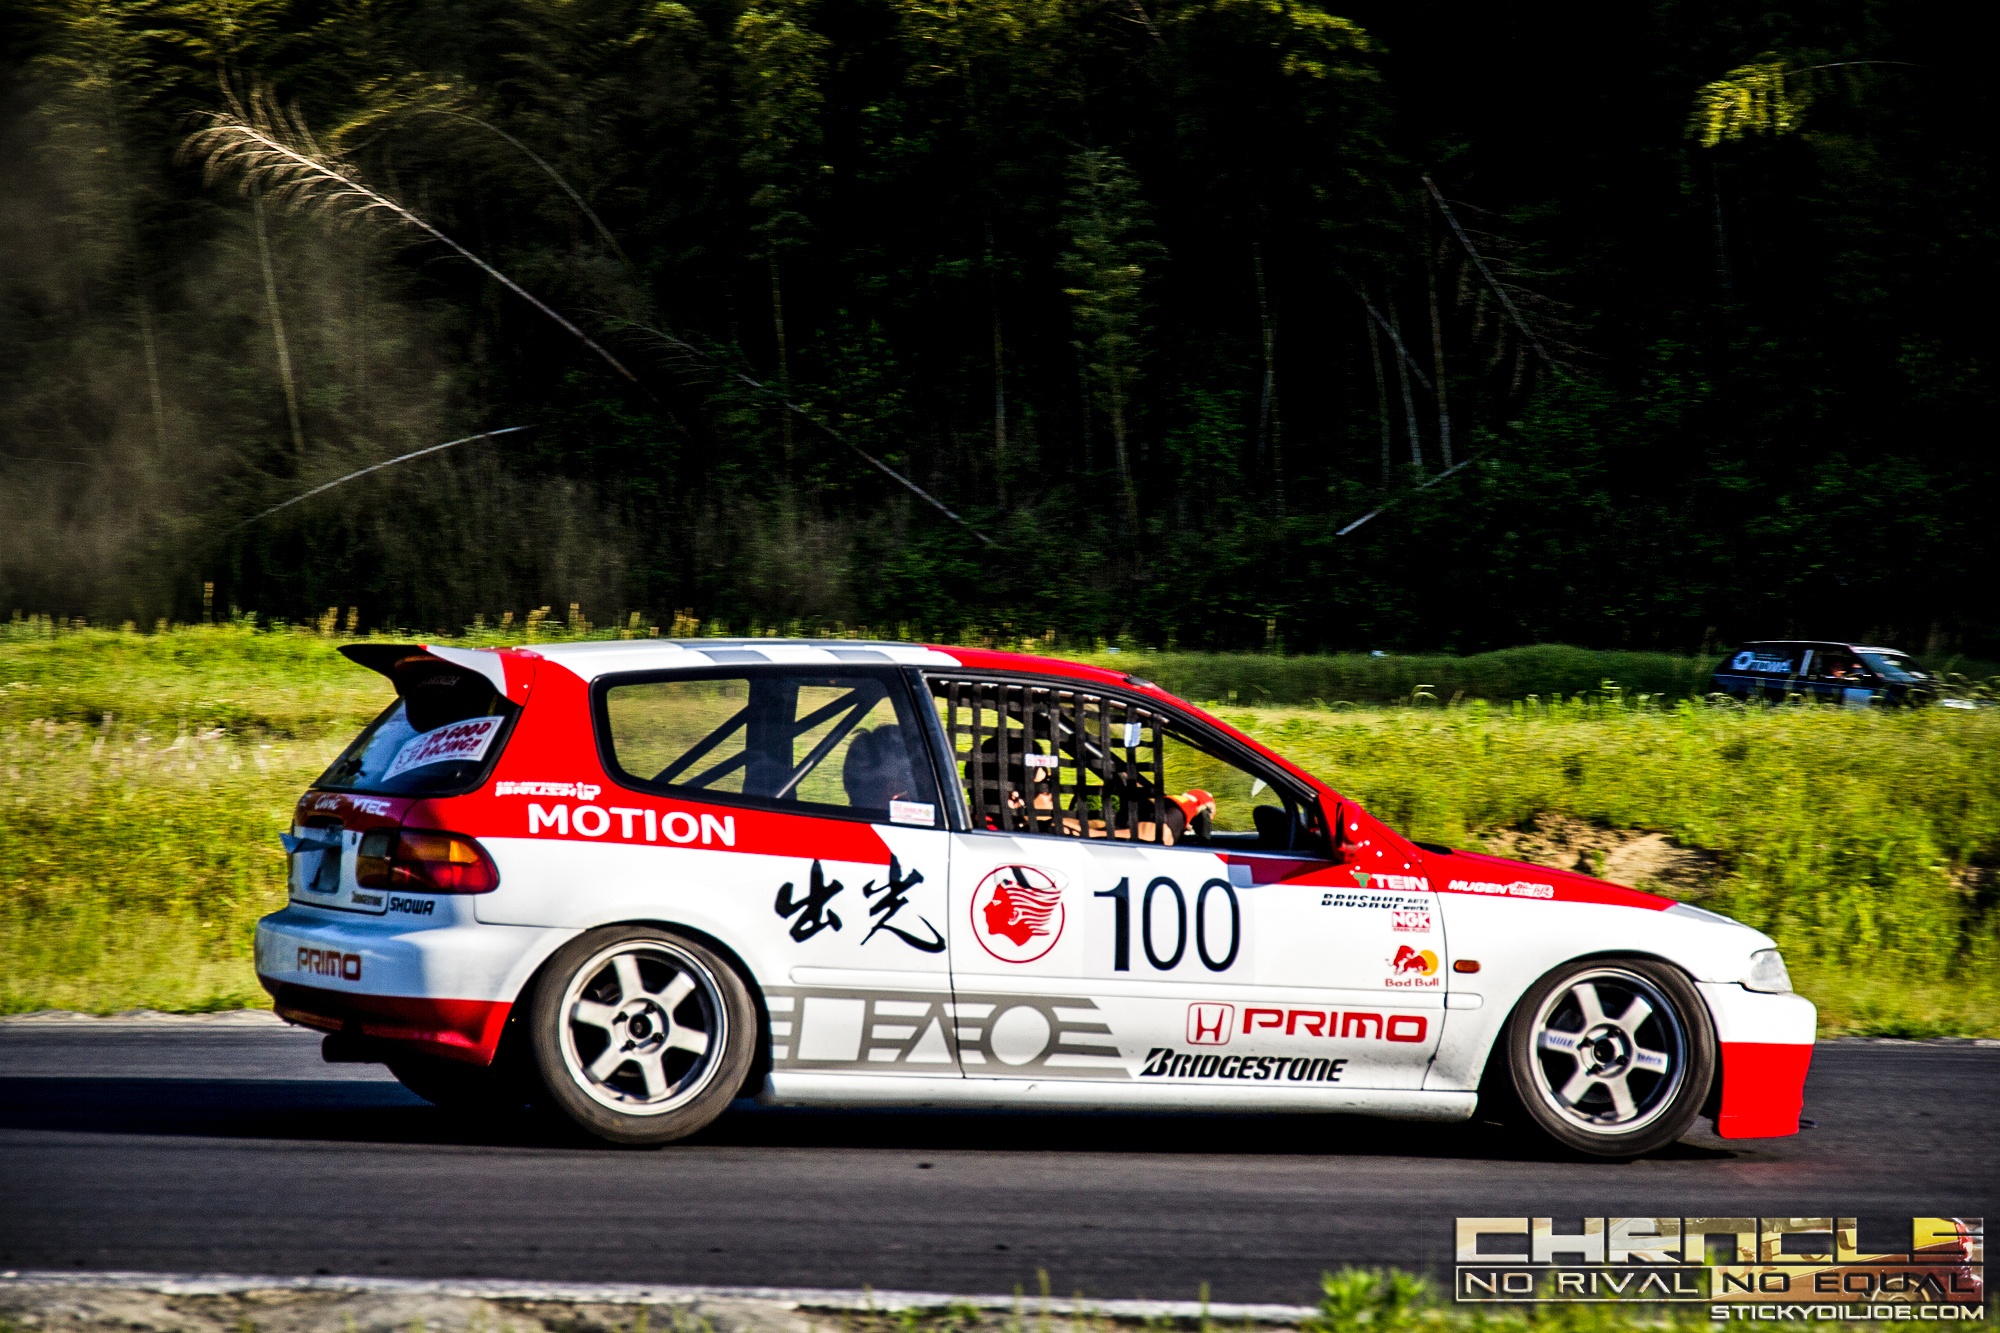 This EG6 Civic bears a scheme that is nearly identical to the Idemitsu Motion Group-A Civic race cars from the 80s.